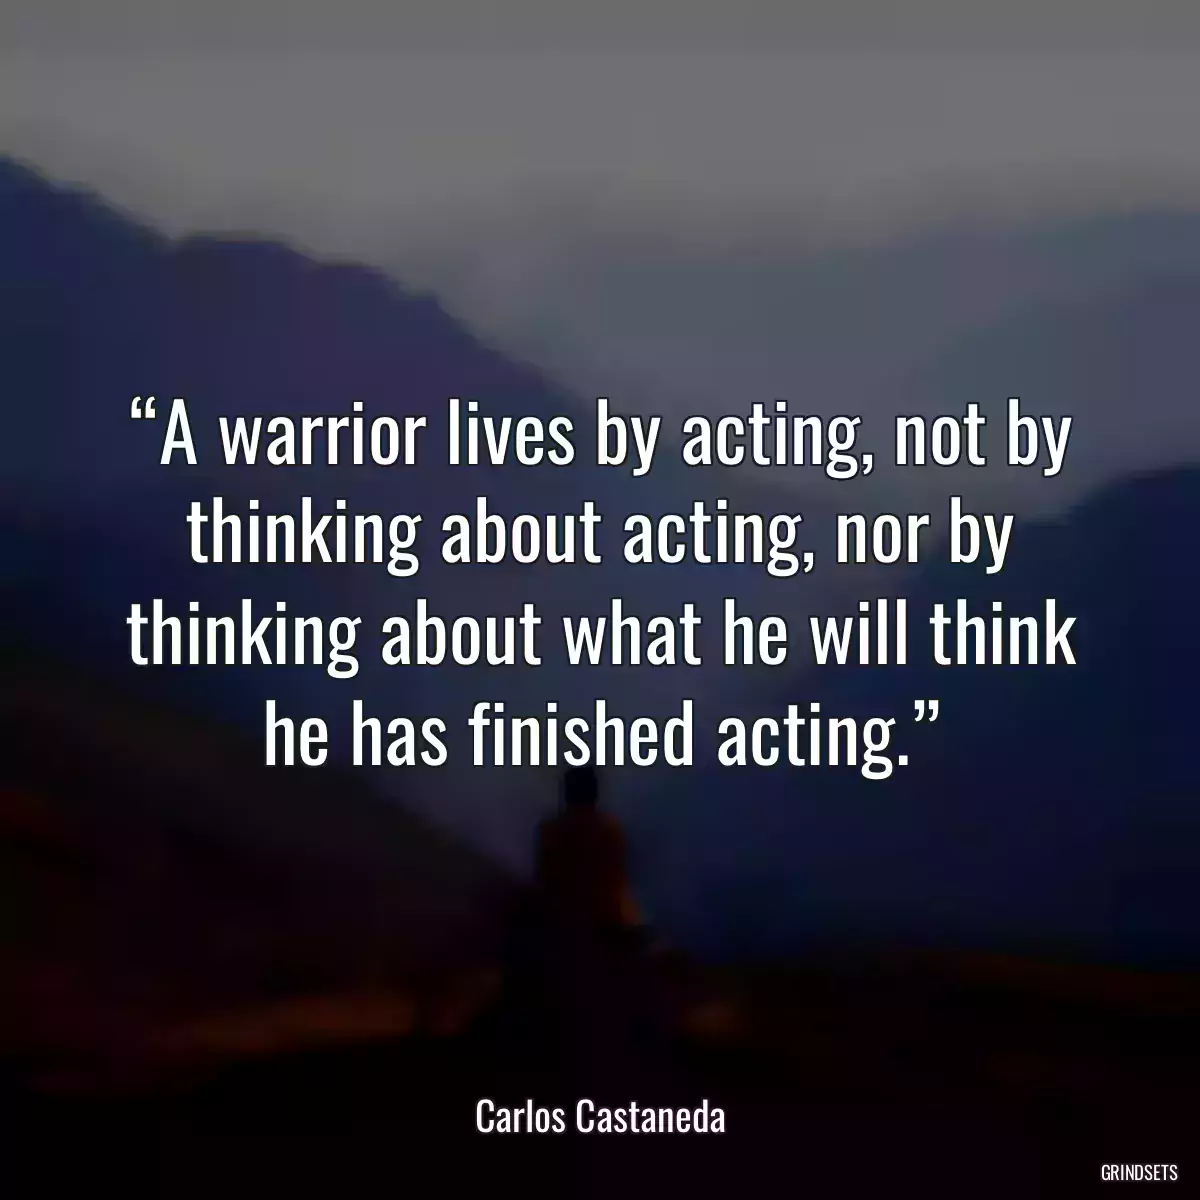 “A warrior lives by acting, not by thinking about acting, nor by thinking about what he will think he has finished acting.”